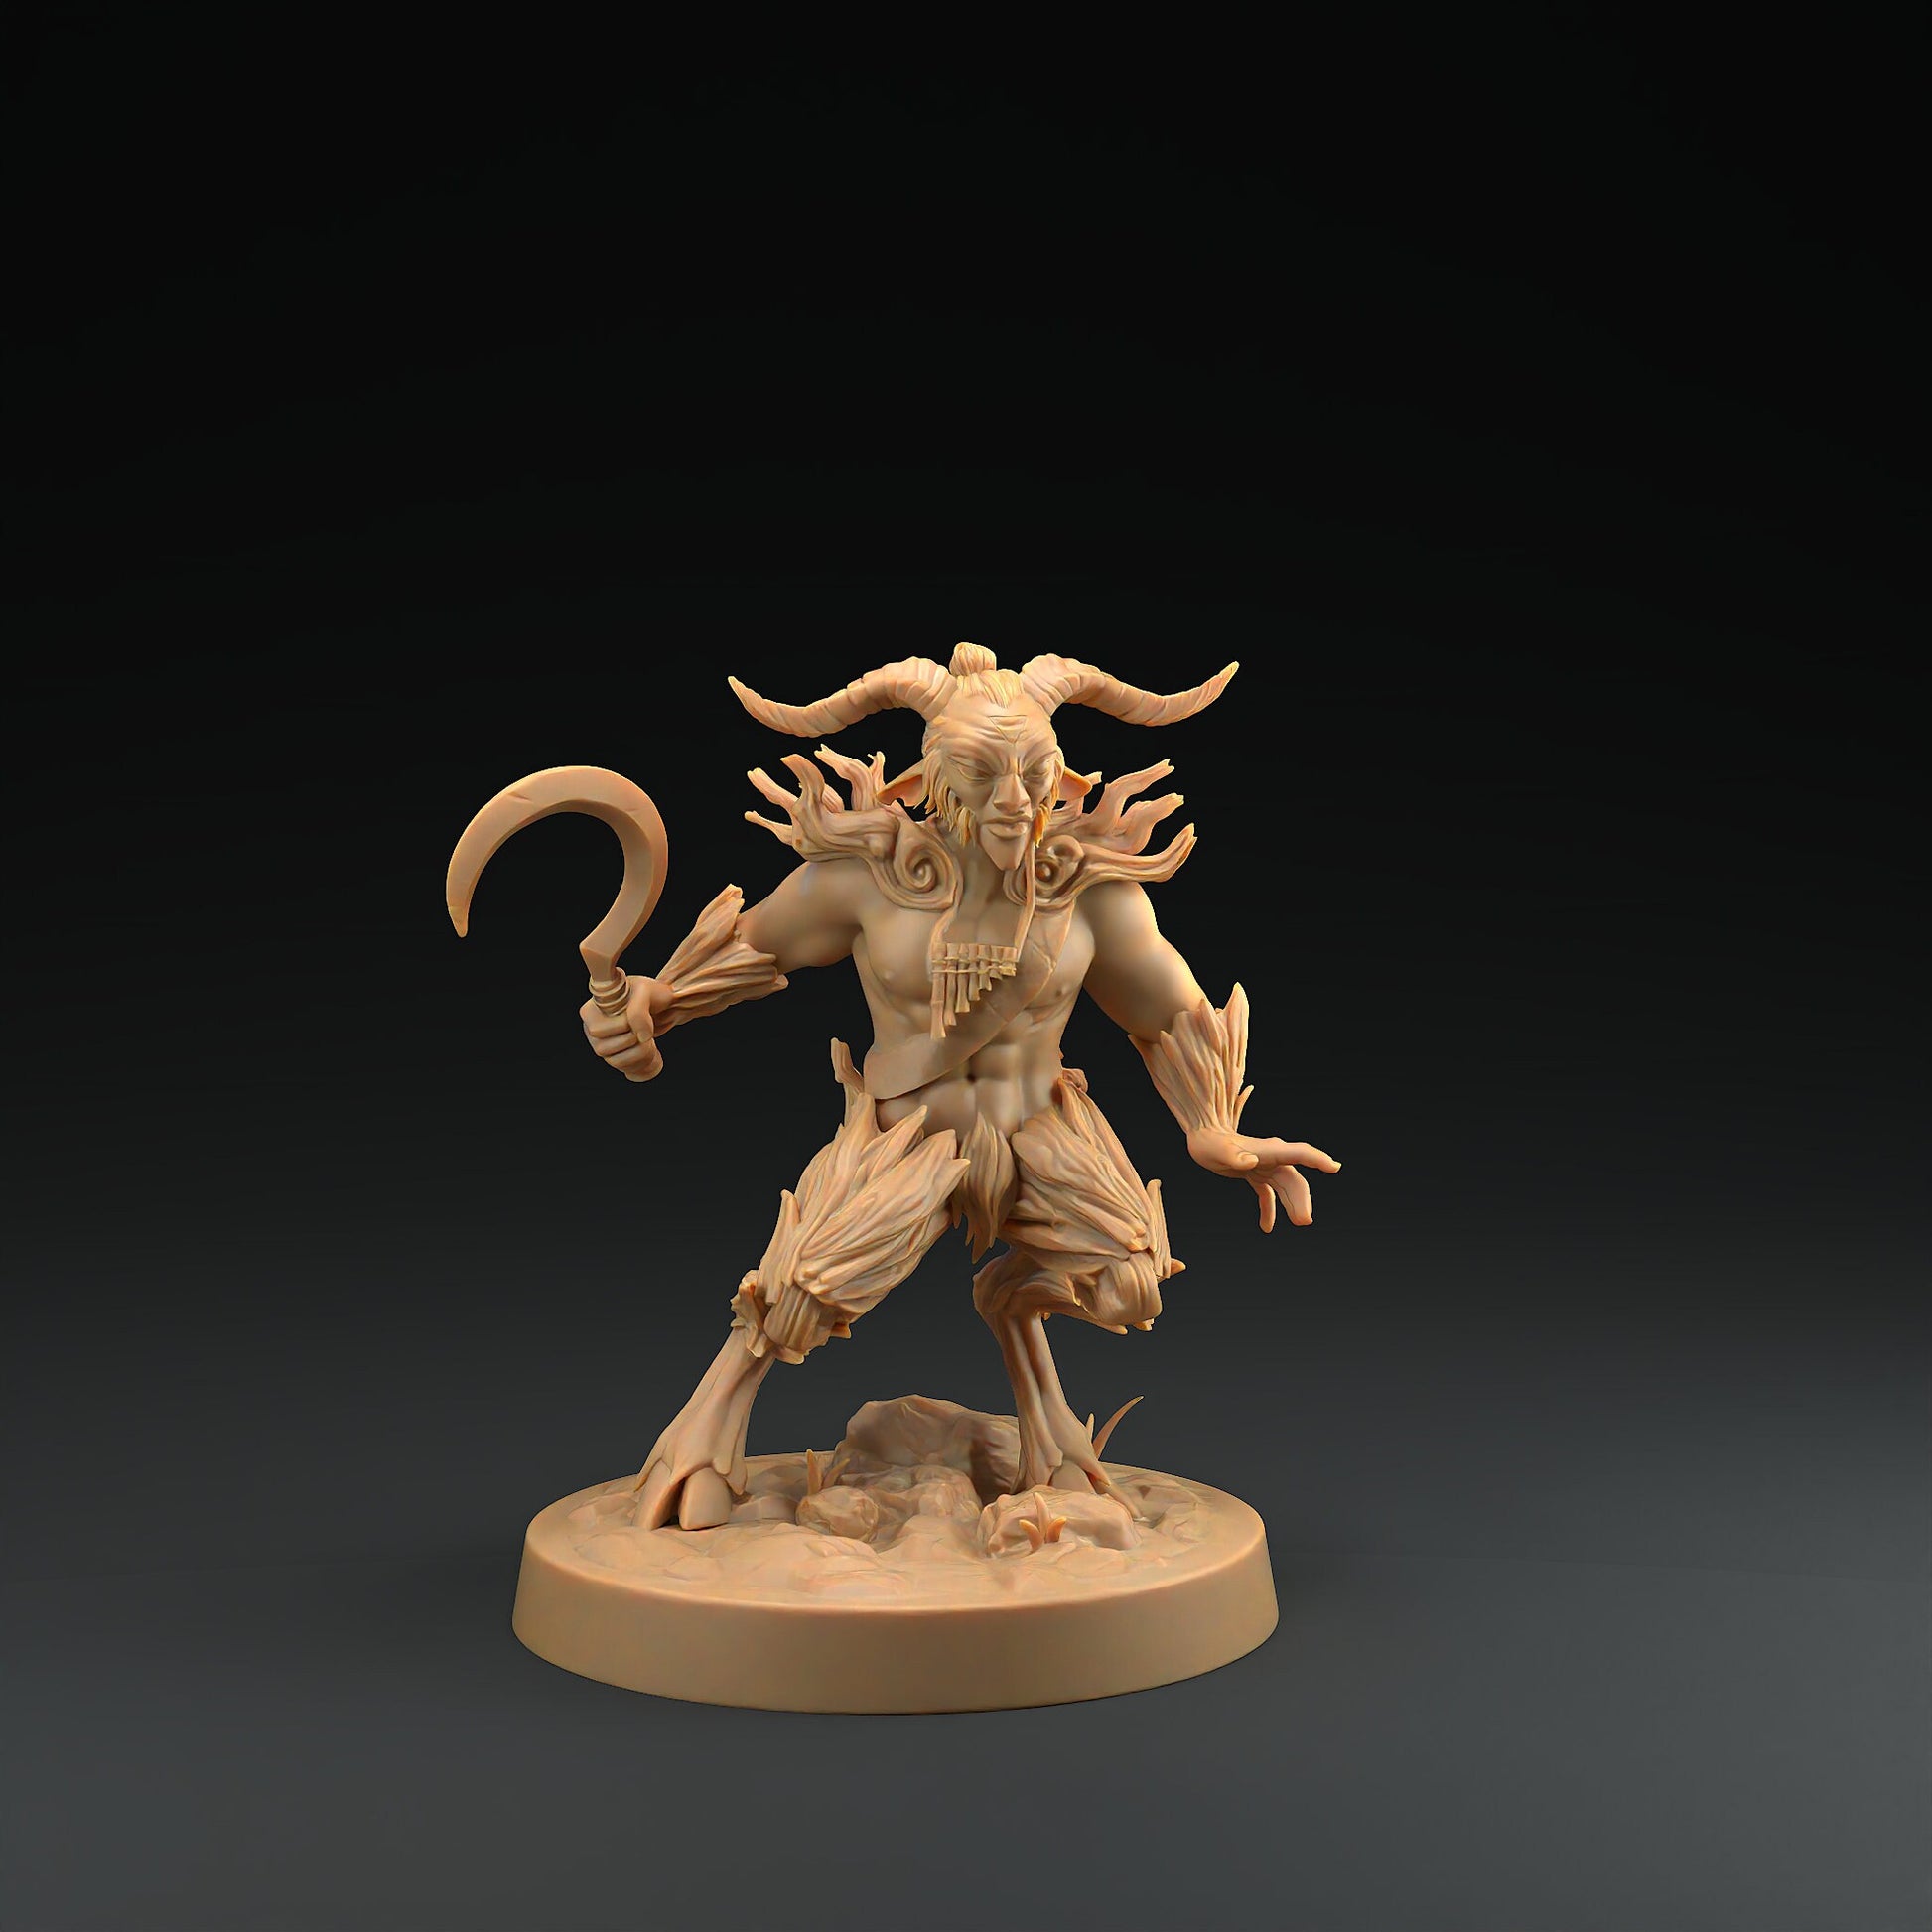 Modular Fauns | RPG Miniature for Dungeons and Dragons|Pathfinder|Tabletop Wargaming | Fey Miniature | Dragon Trappers Lodge